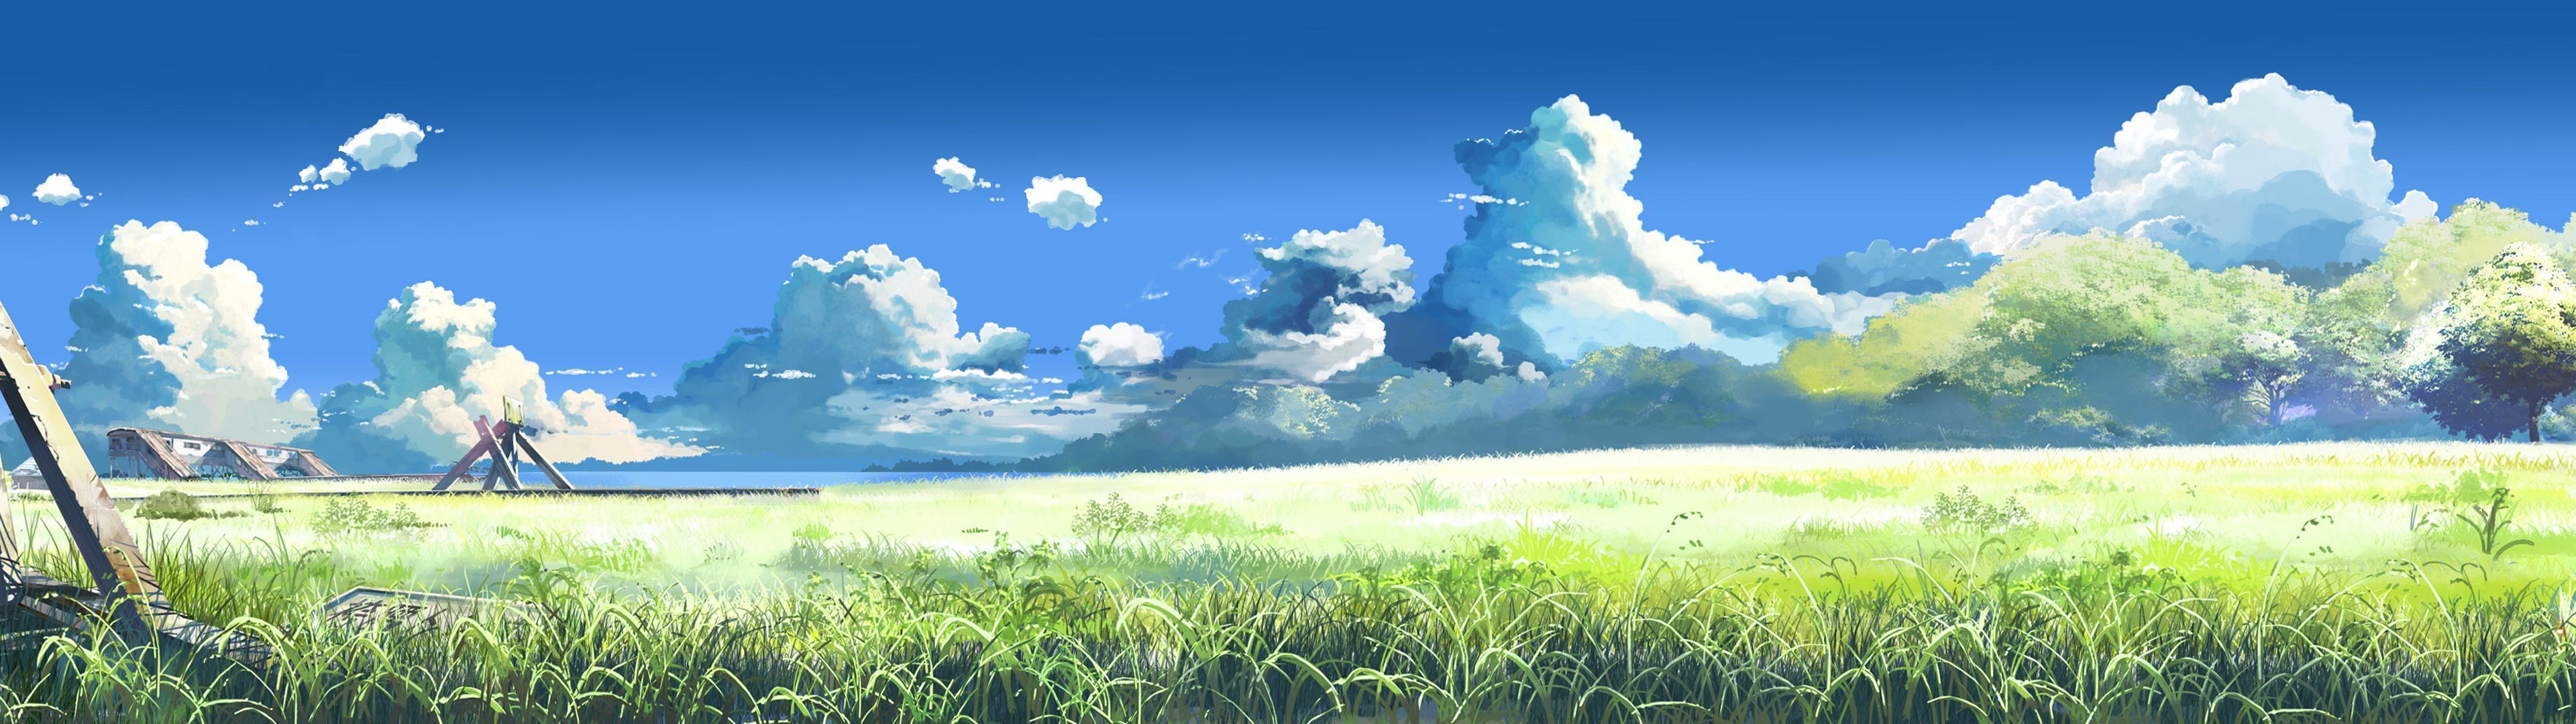 Anime Group XP - Other & Anime Background Wallpapers on Desktop Nexus  (Image 238718)